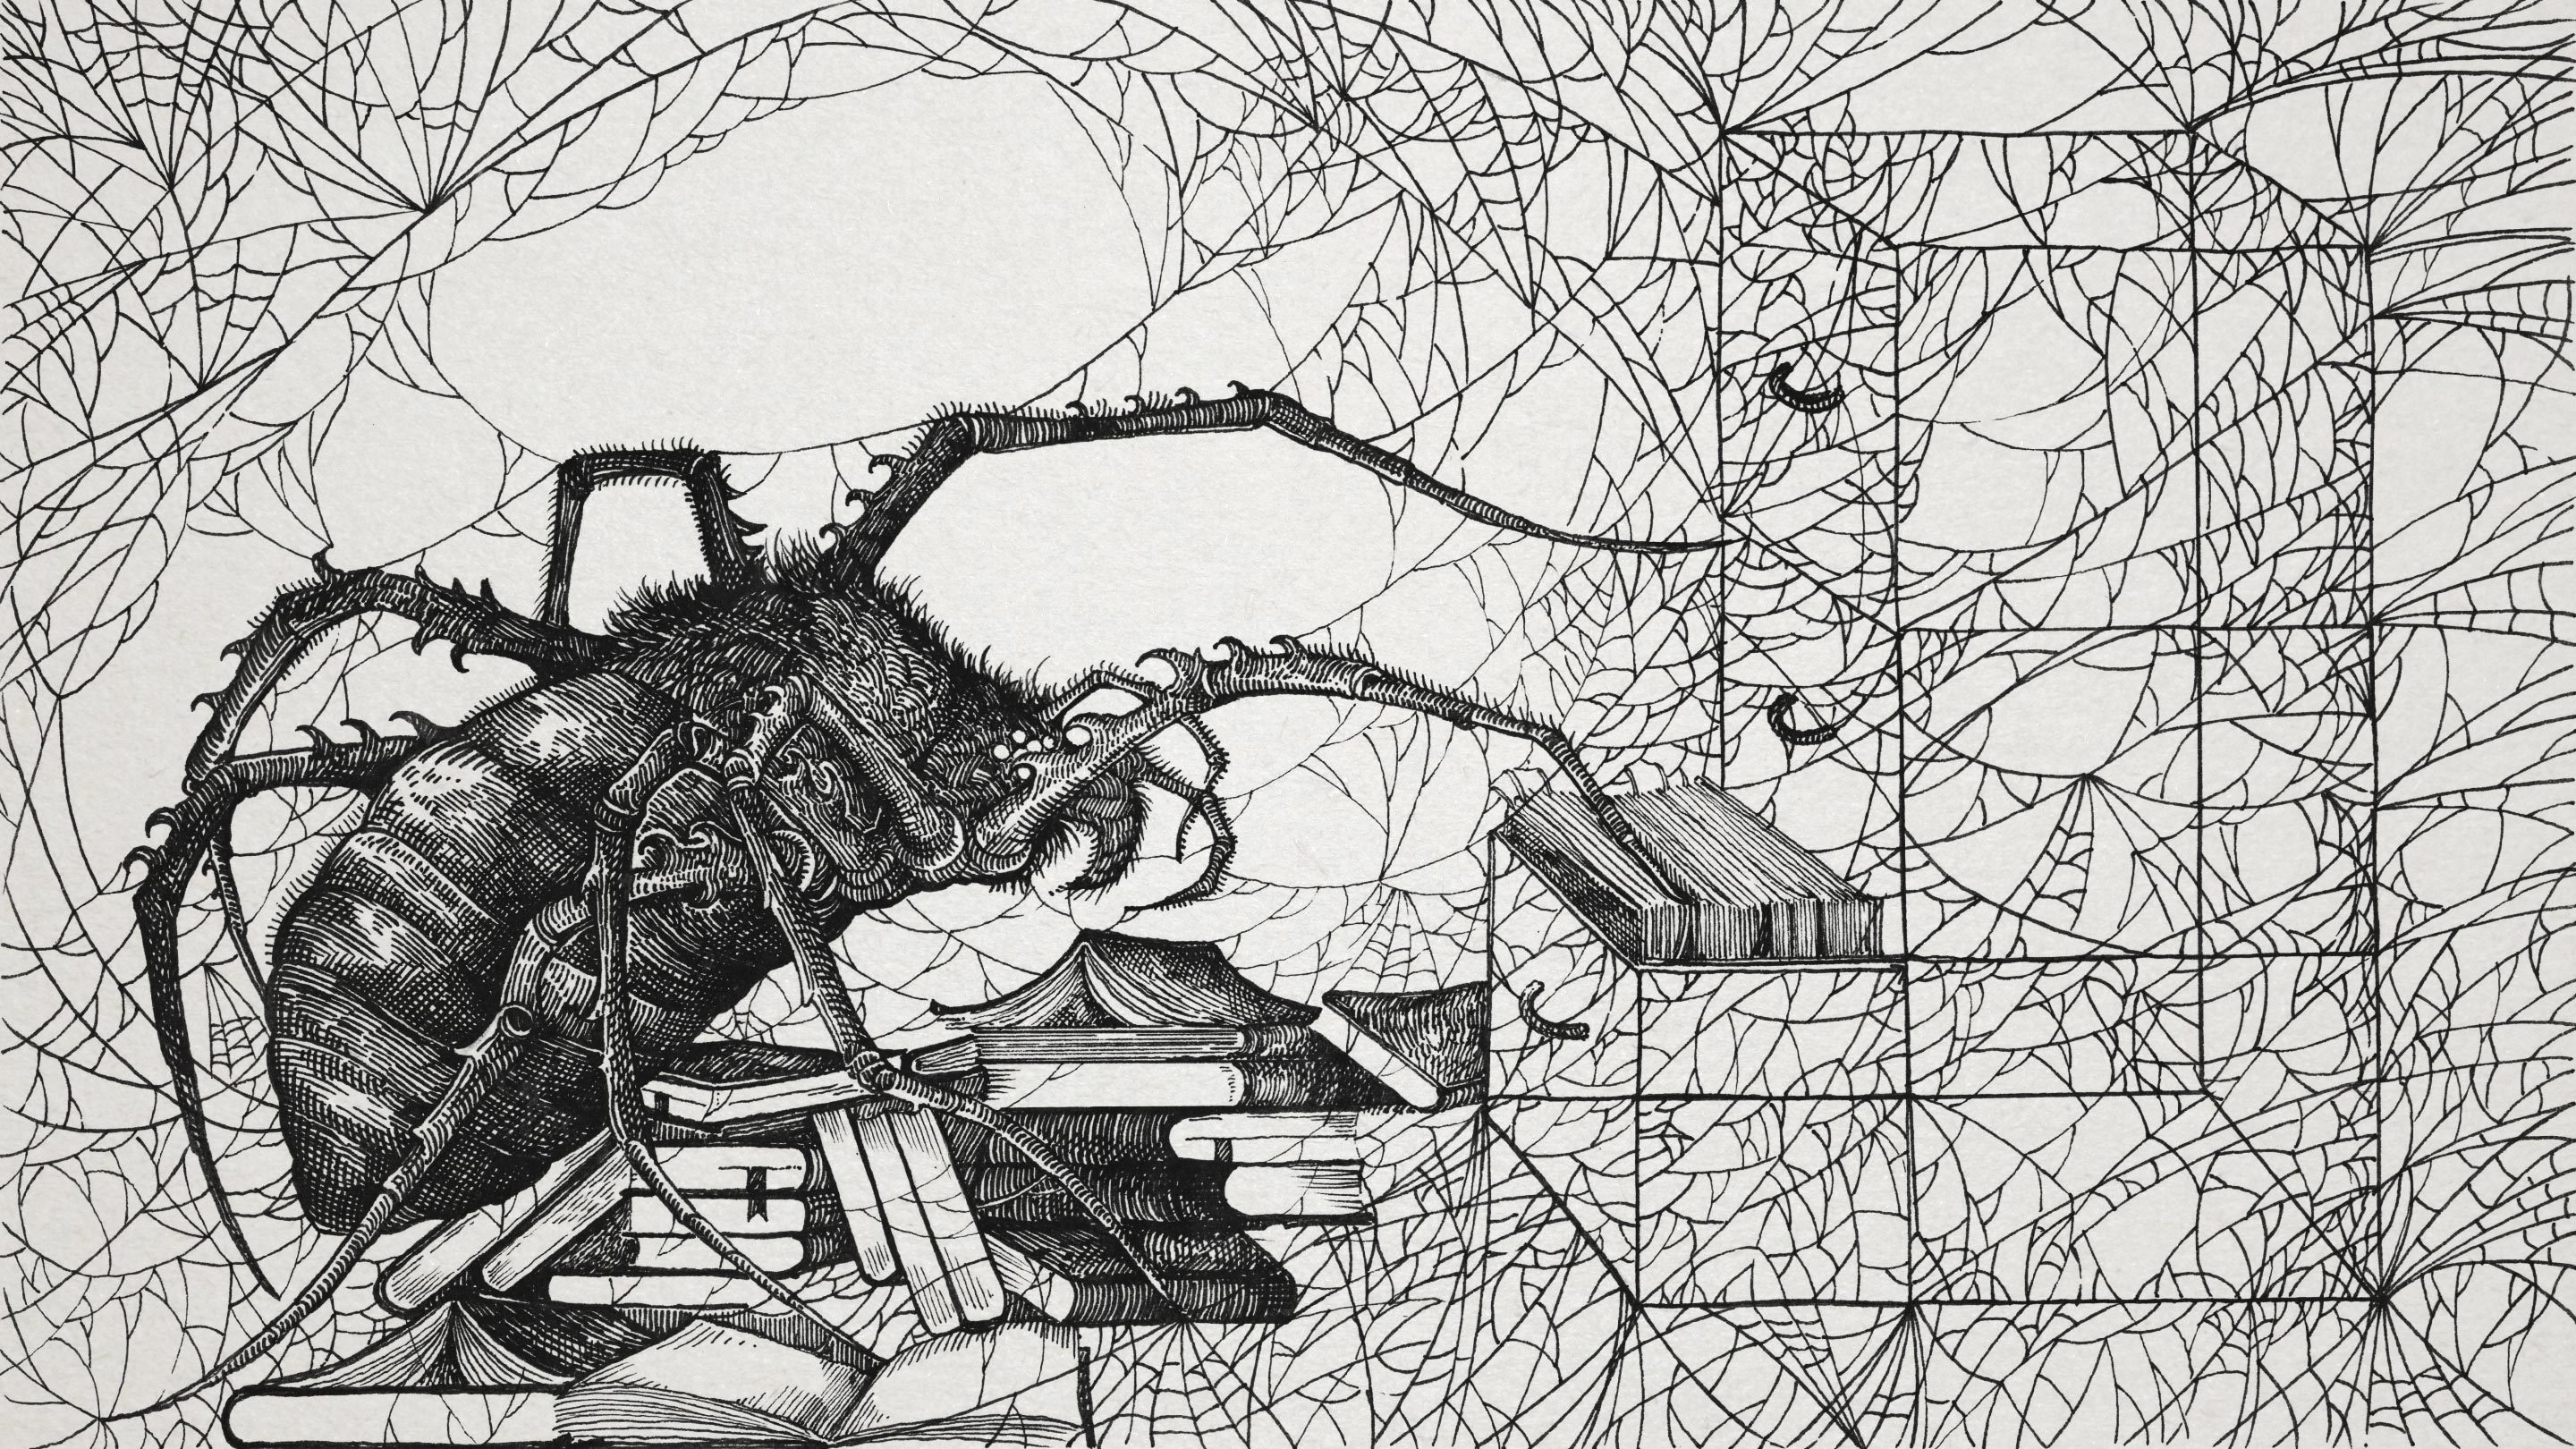 The Thoughts of a Spiderweb | Quanta Magazine